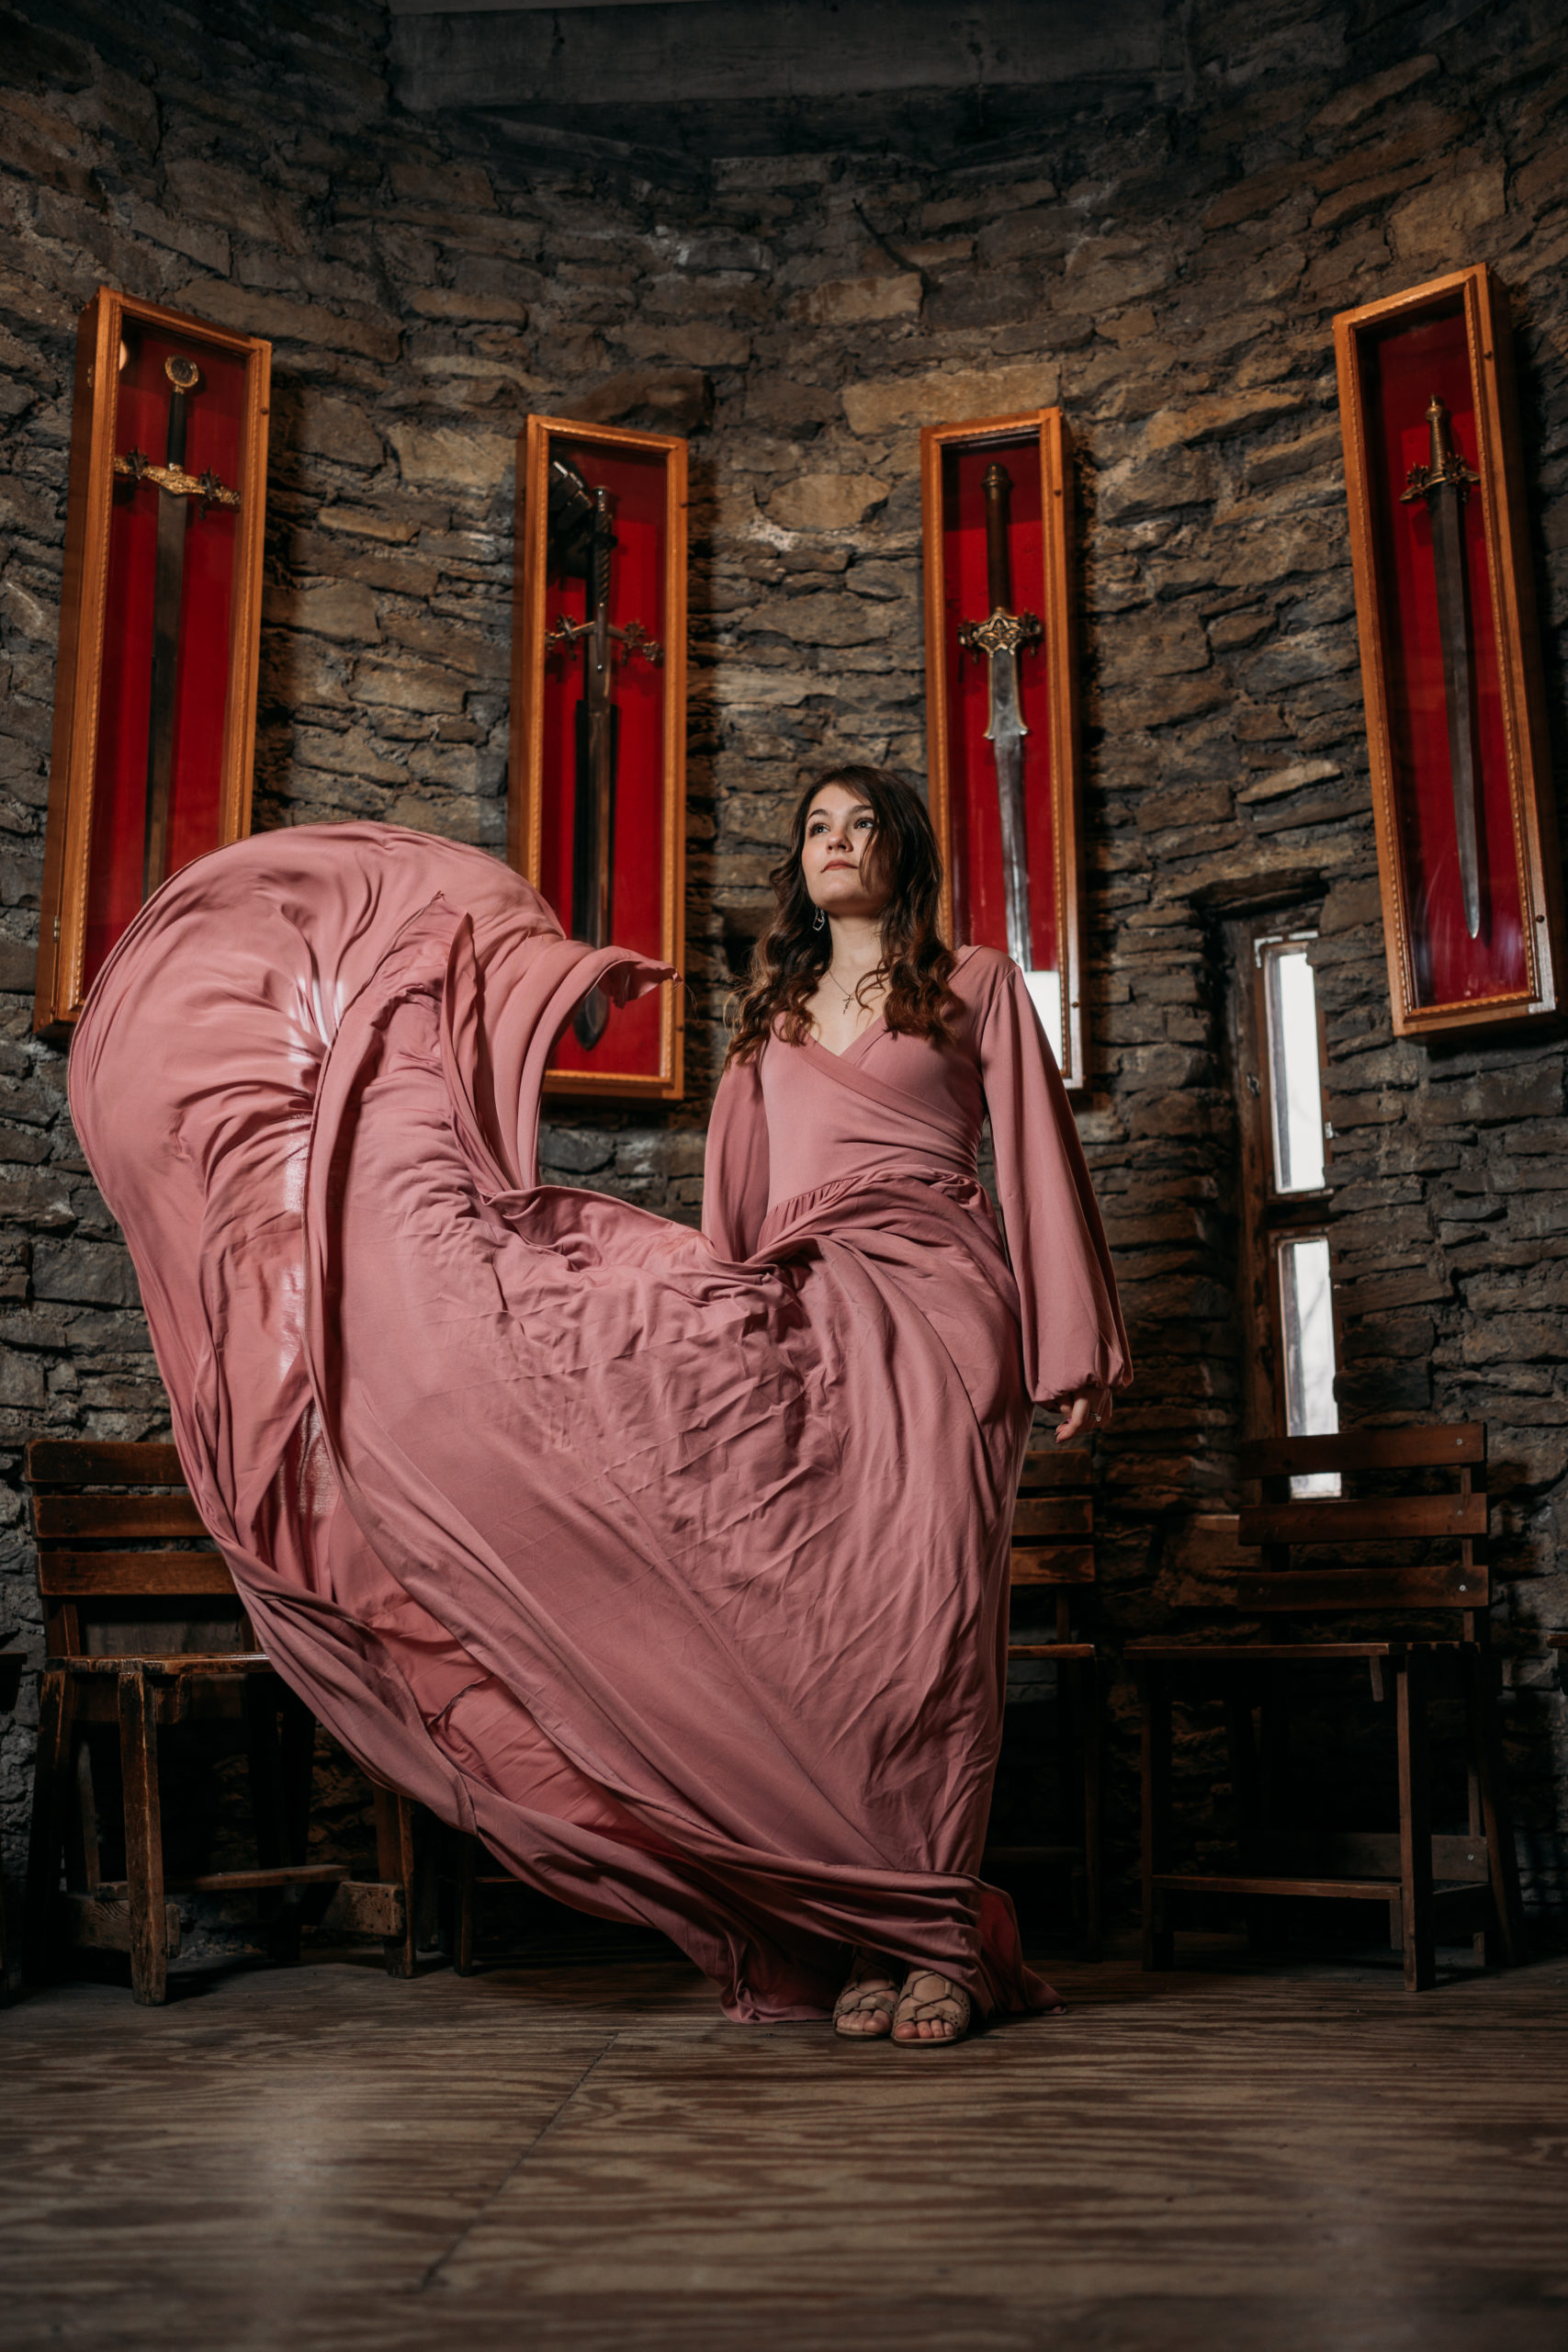 Loveland Castle Senior Session. Flowy dusty rose gown in the gardens. Standing in sword display room